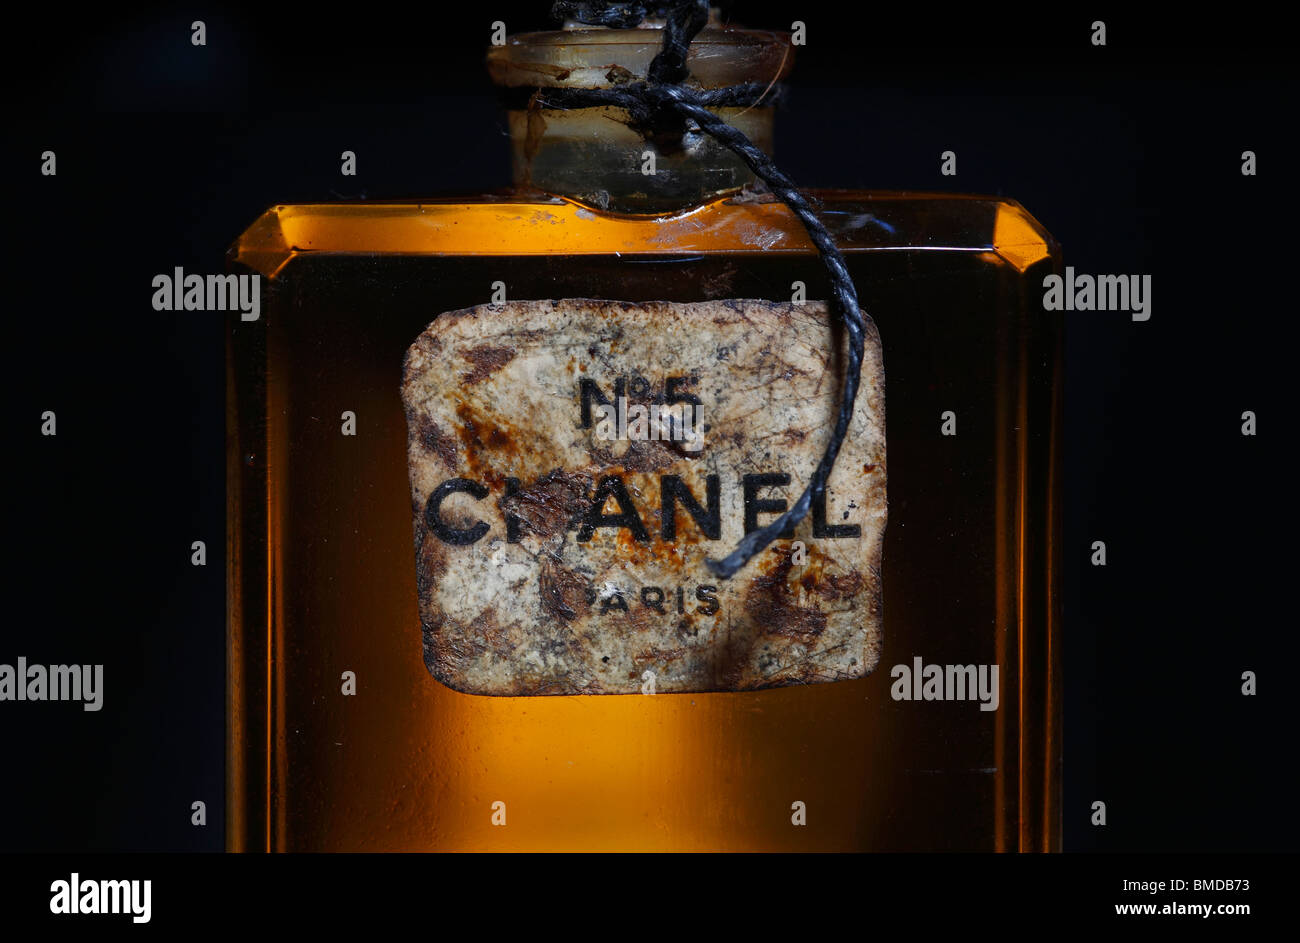 old bottle of chanel no.5 perfume with distressed label Stock Photo